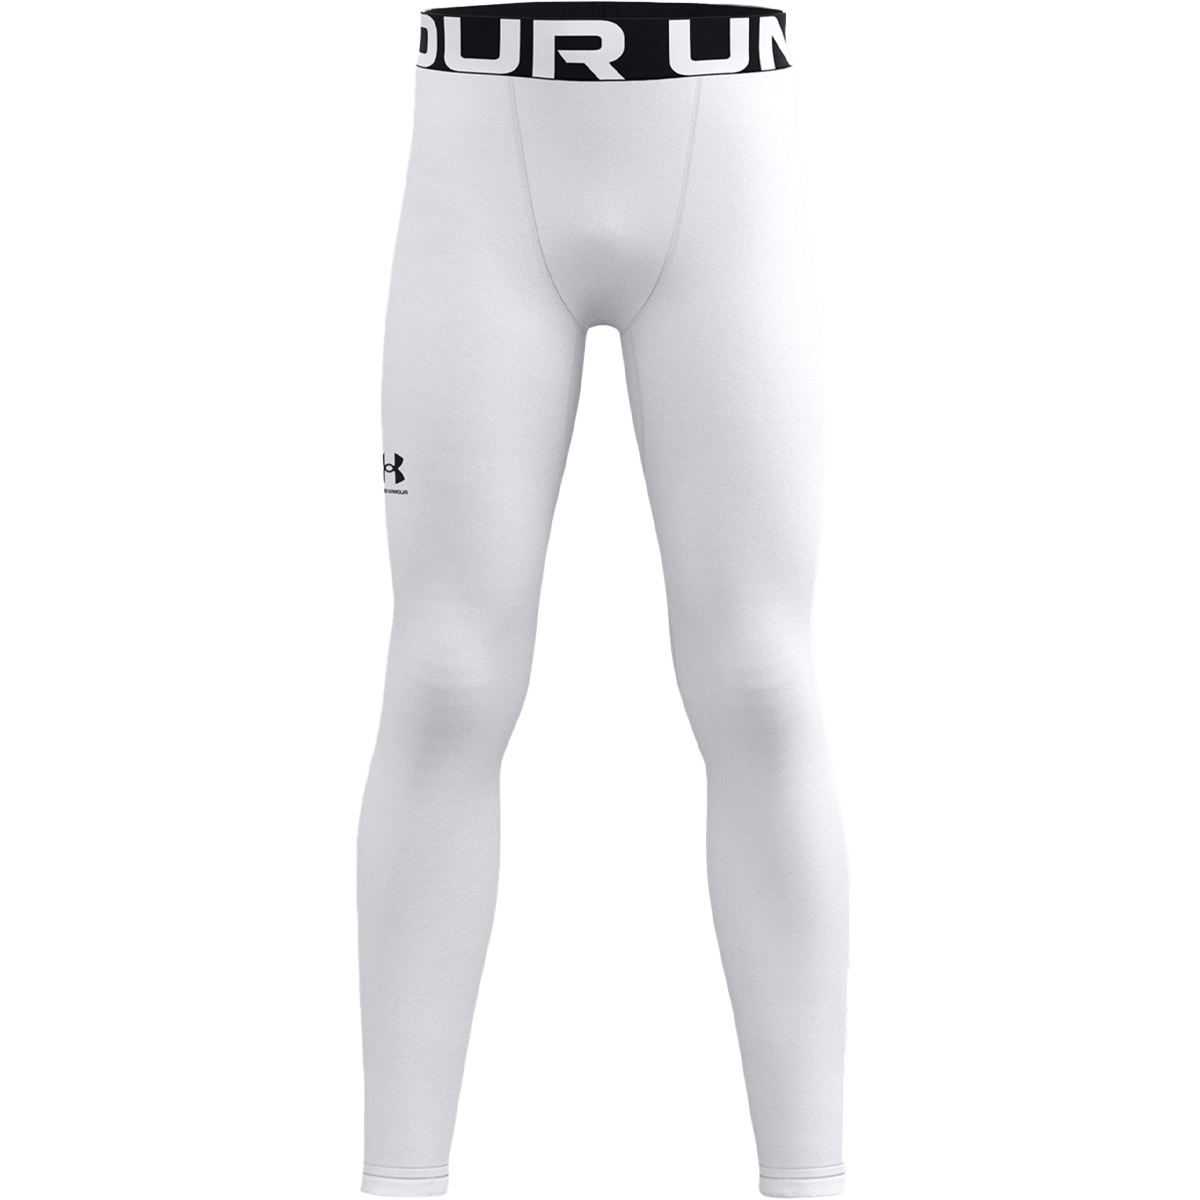 Youth ColdGear Armour Leggings alternate view